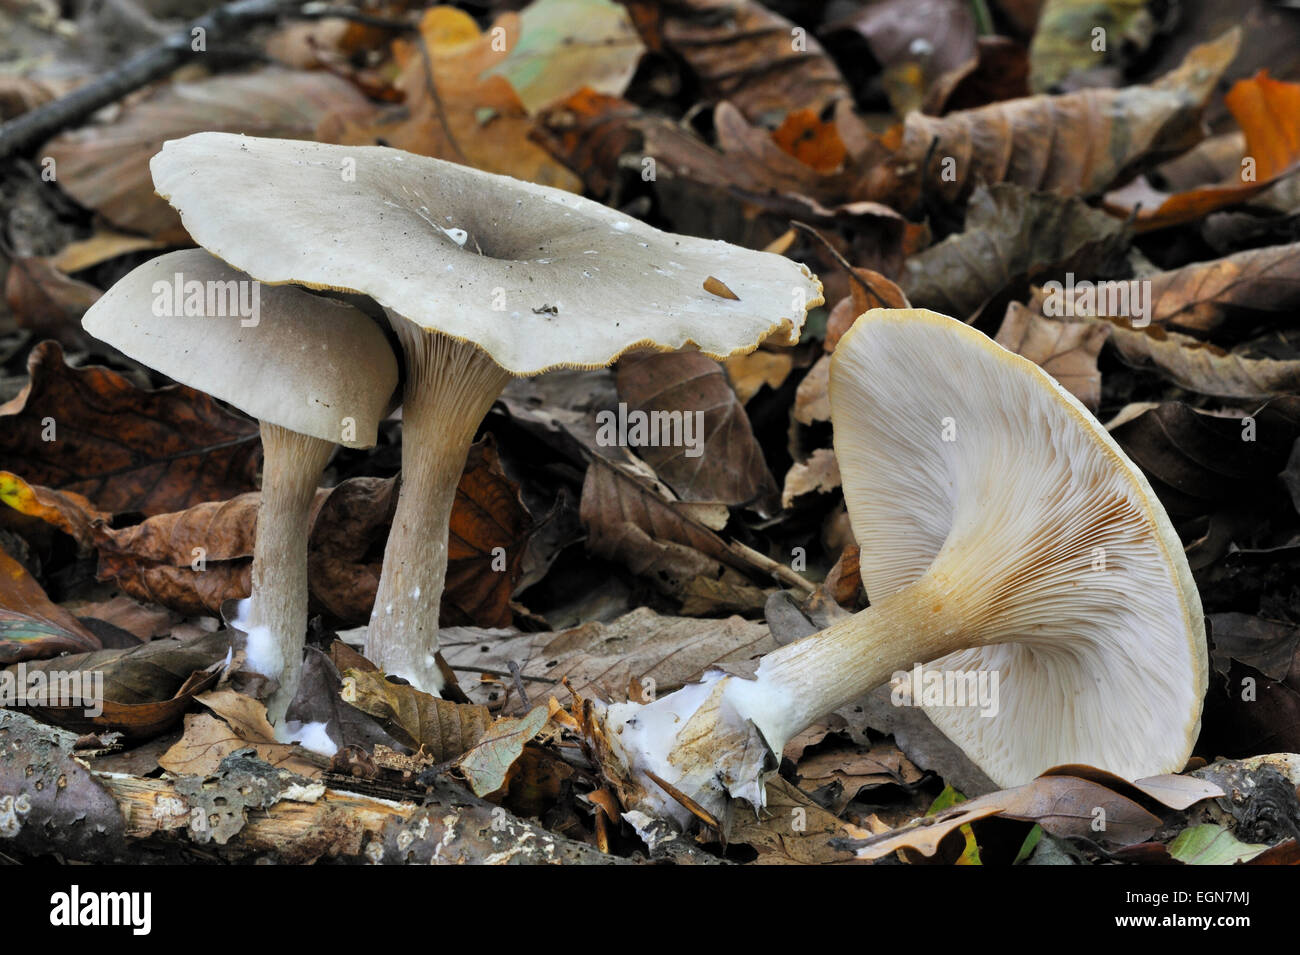 Clouded agaric / Cloud funnel (Clitocybe nebularis / Lepista nebularis) mushrooms showing underside with gills Stock Photo